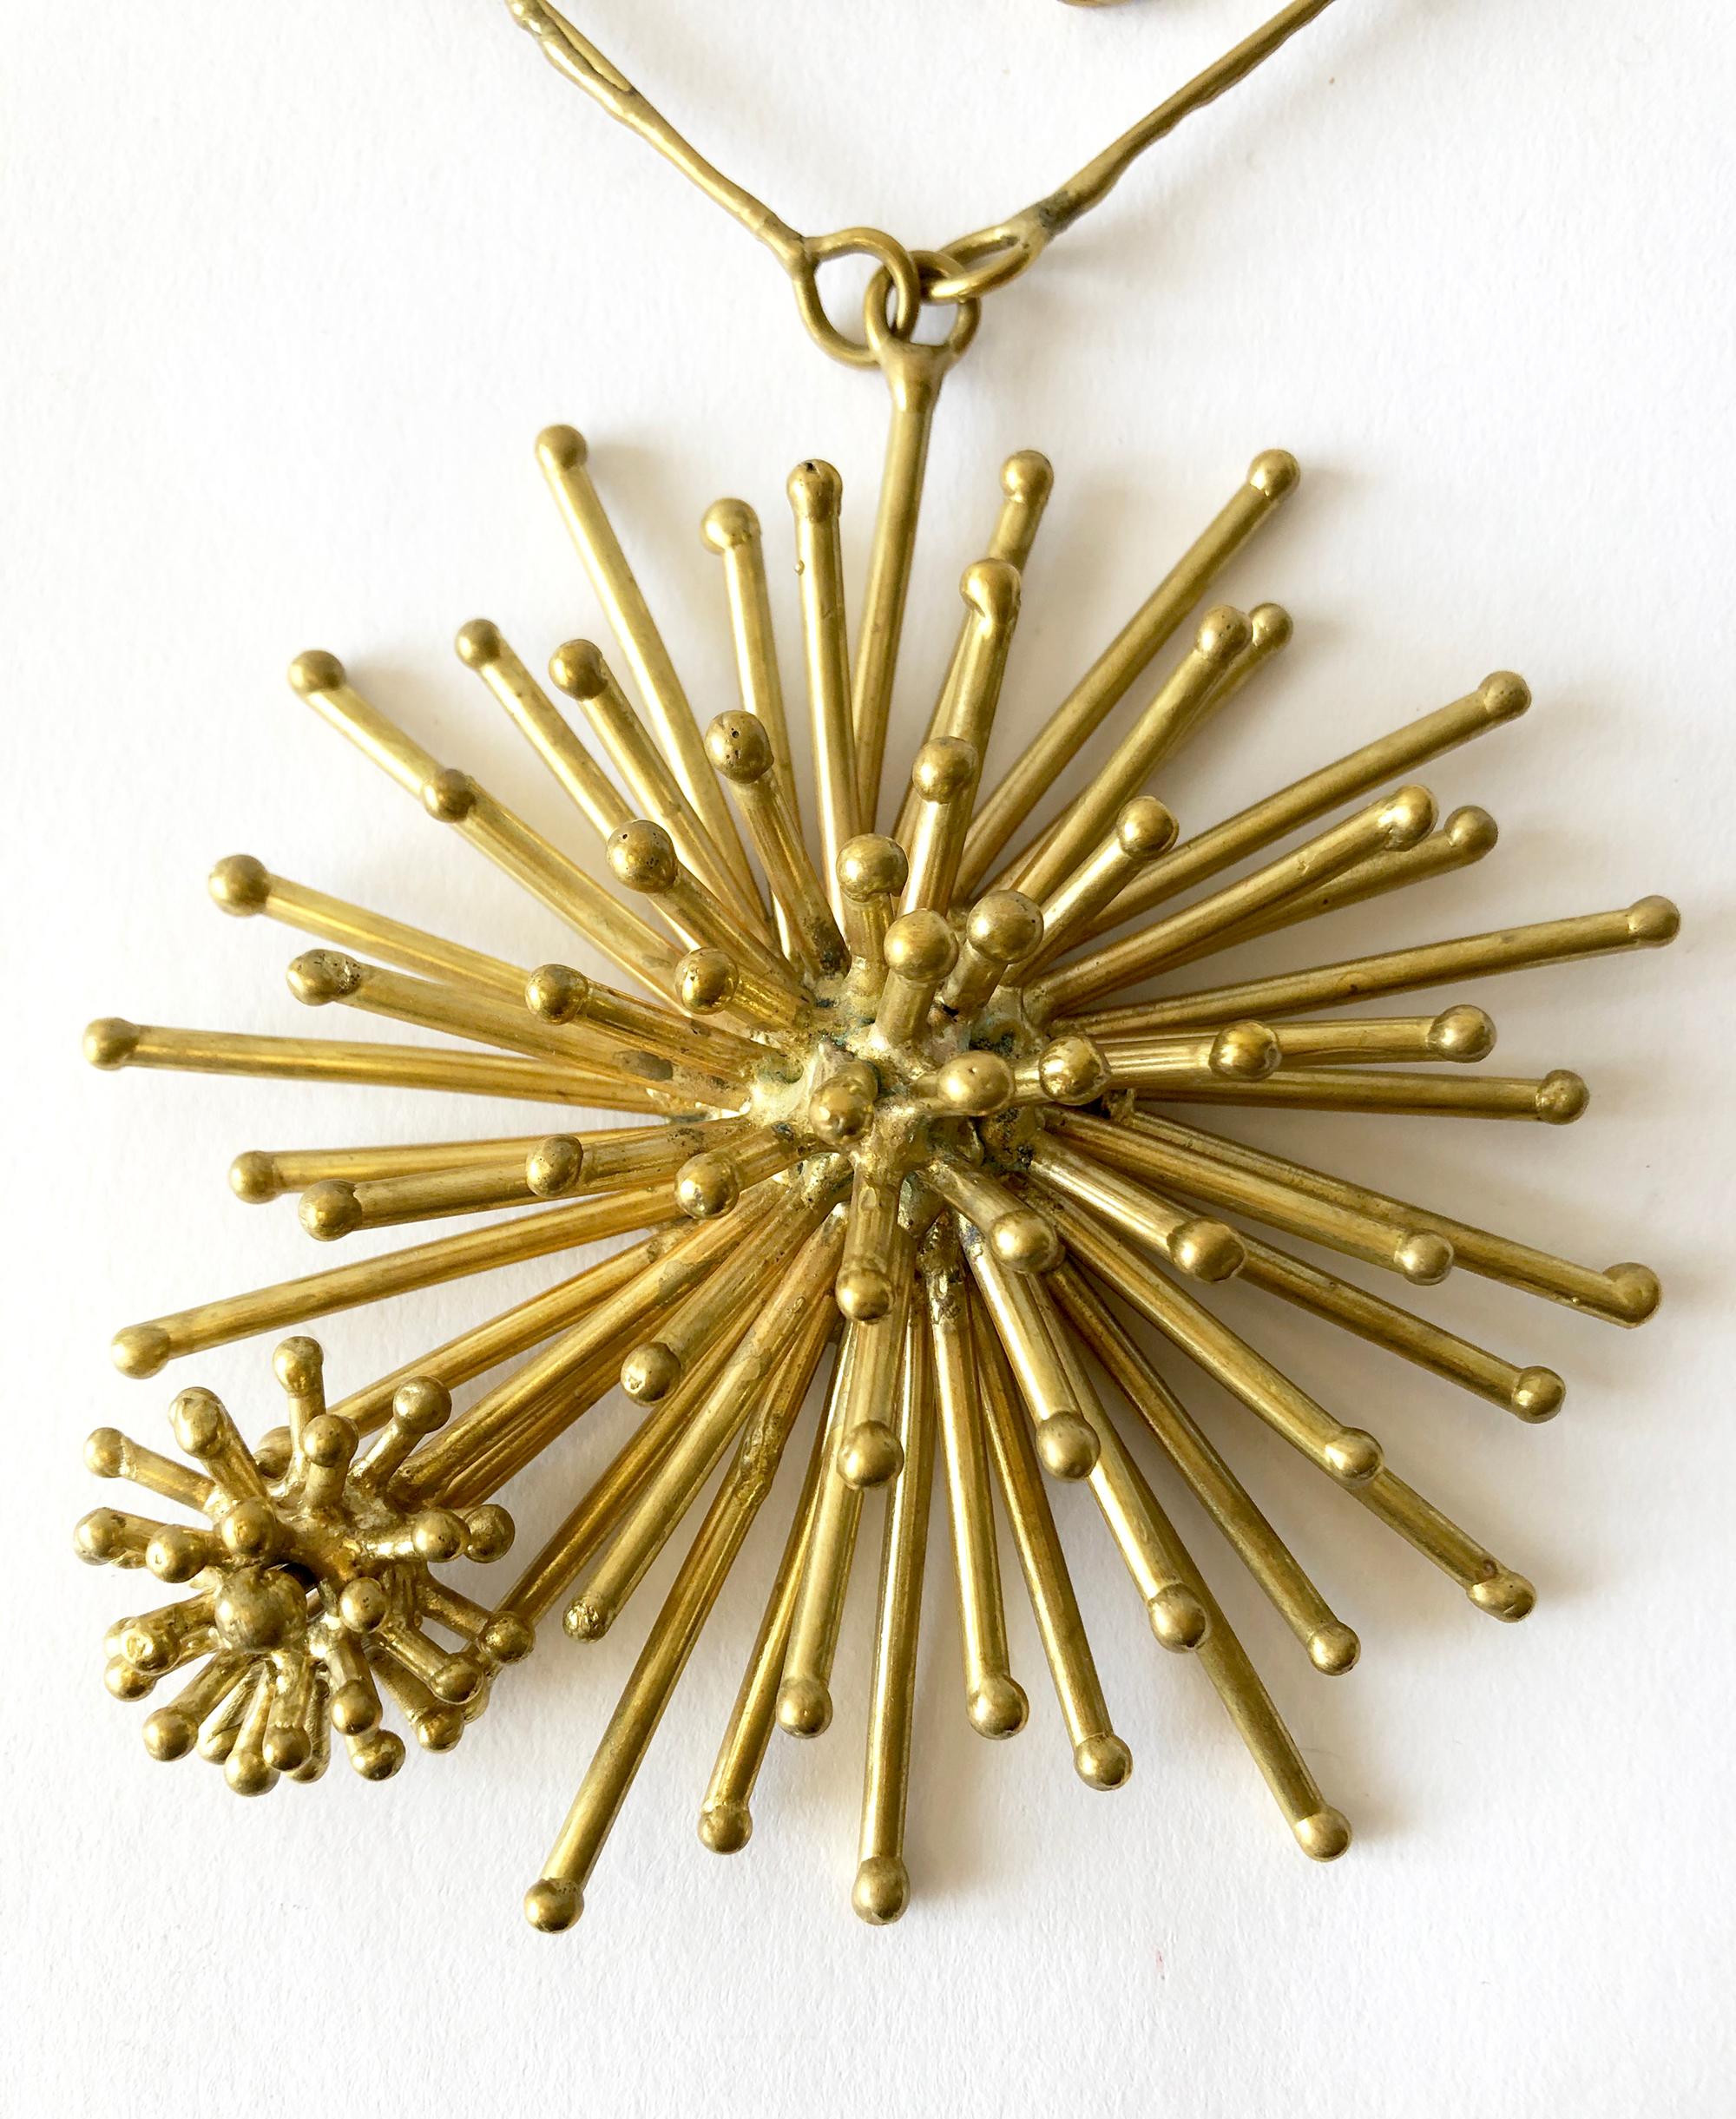 Artisan Pal Kepenyes Gold-Plated Bronze Kinetic Starburst Mexican Modernist Necklace